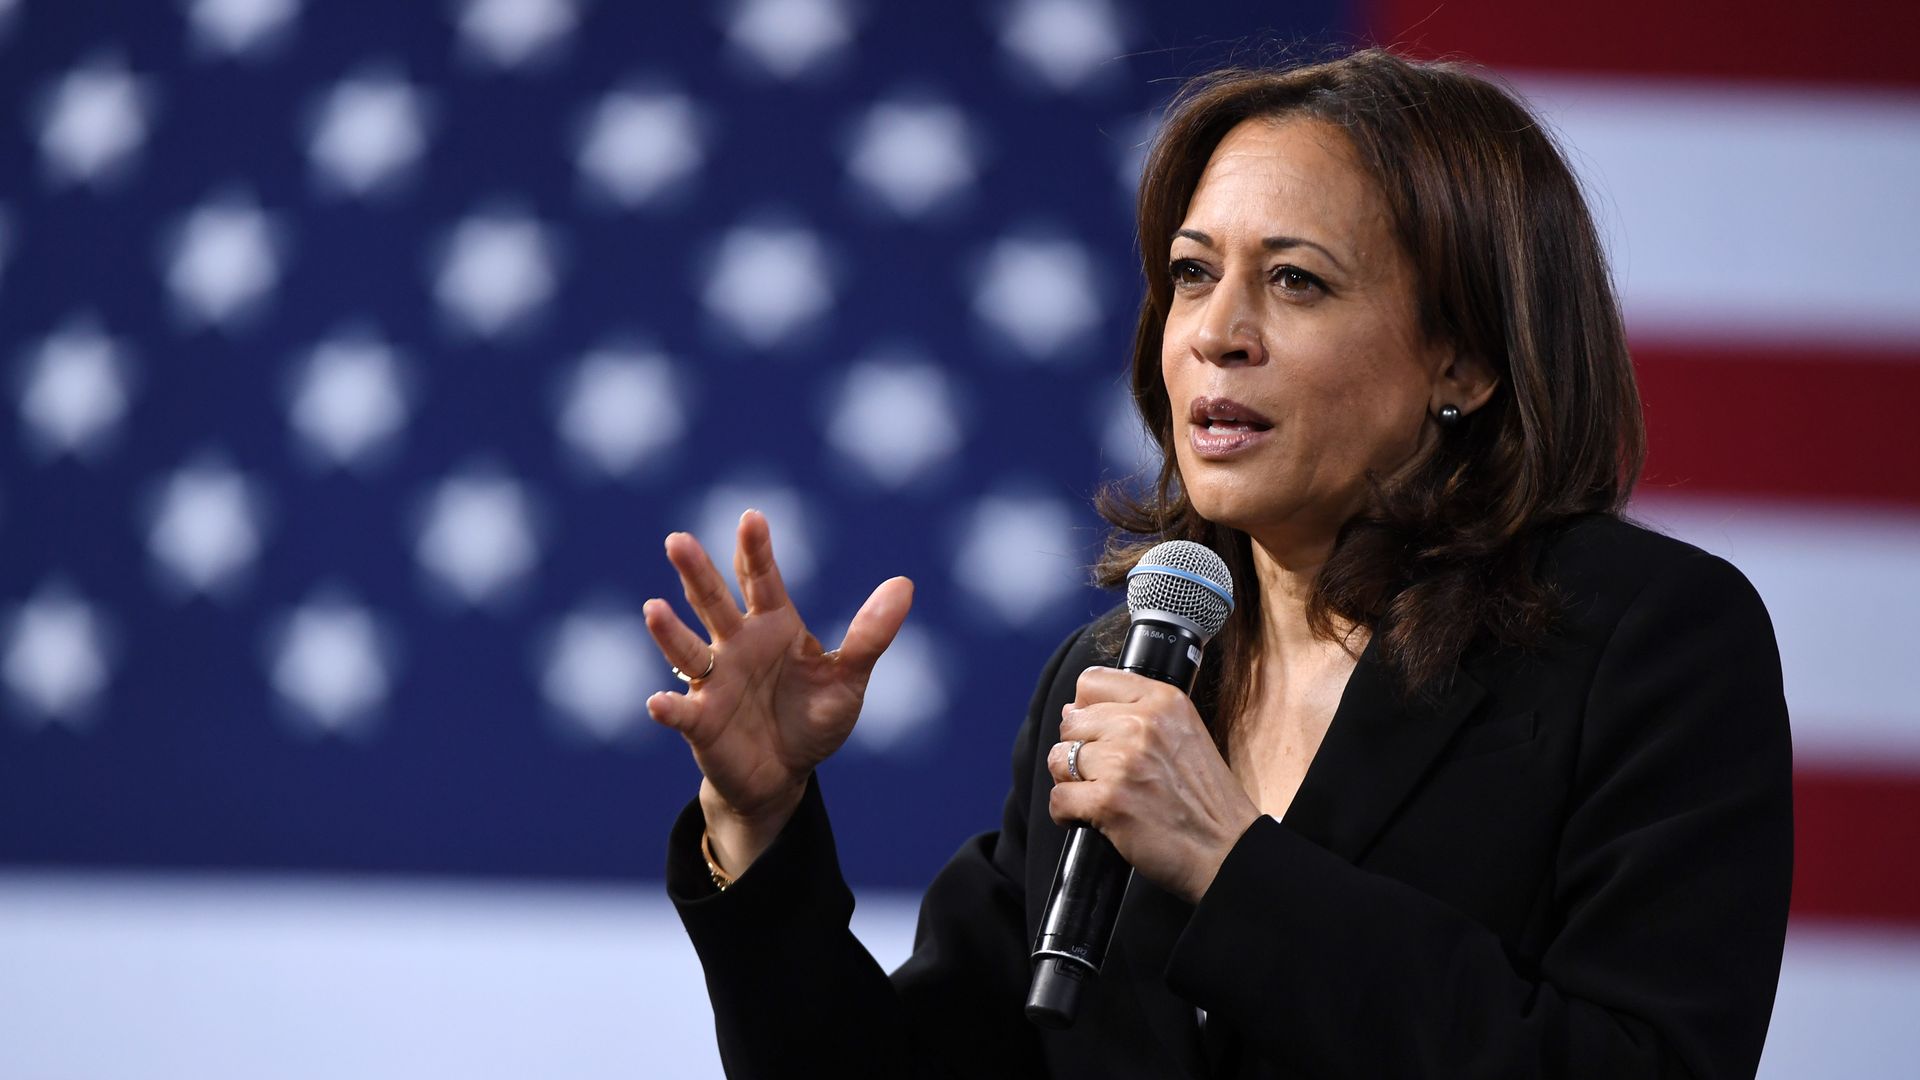 Sen. Kamala Harris (D-CA) speaks at the National Forum on Wages and Working People: Creating an Economy That Works for All at Enclave on April 27, 2019 in Las Vegas, Nevada.